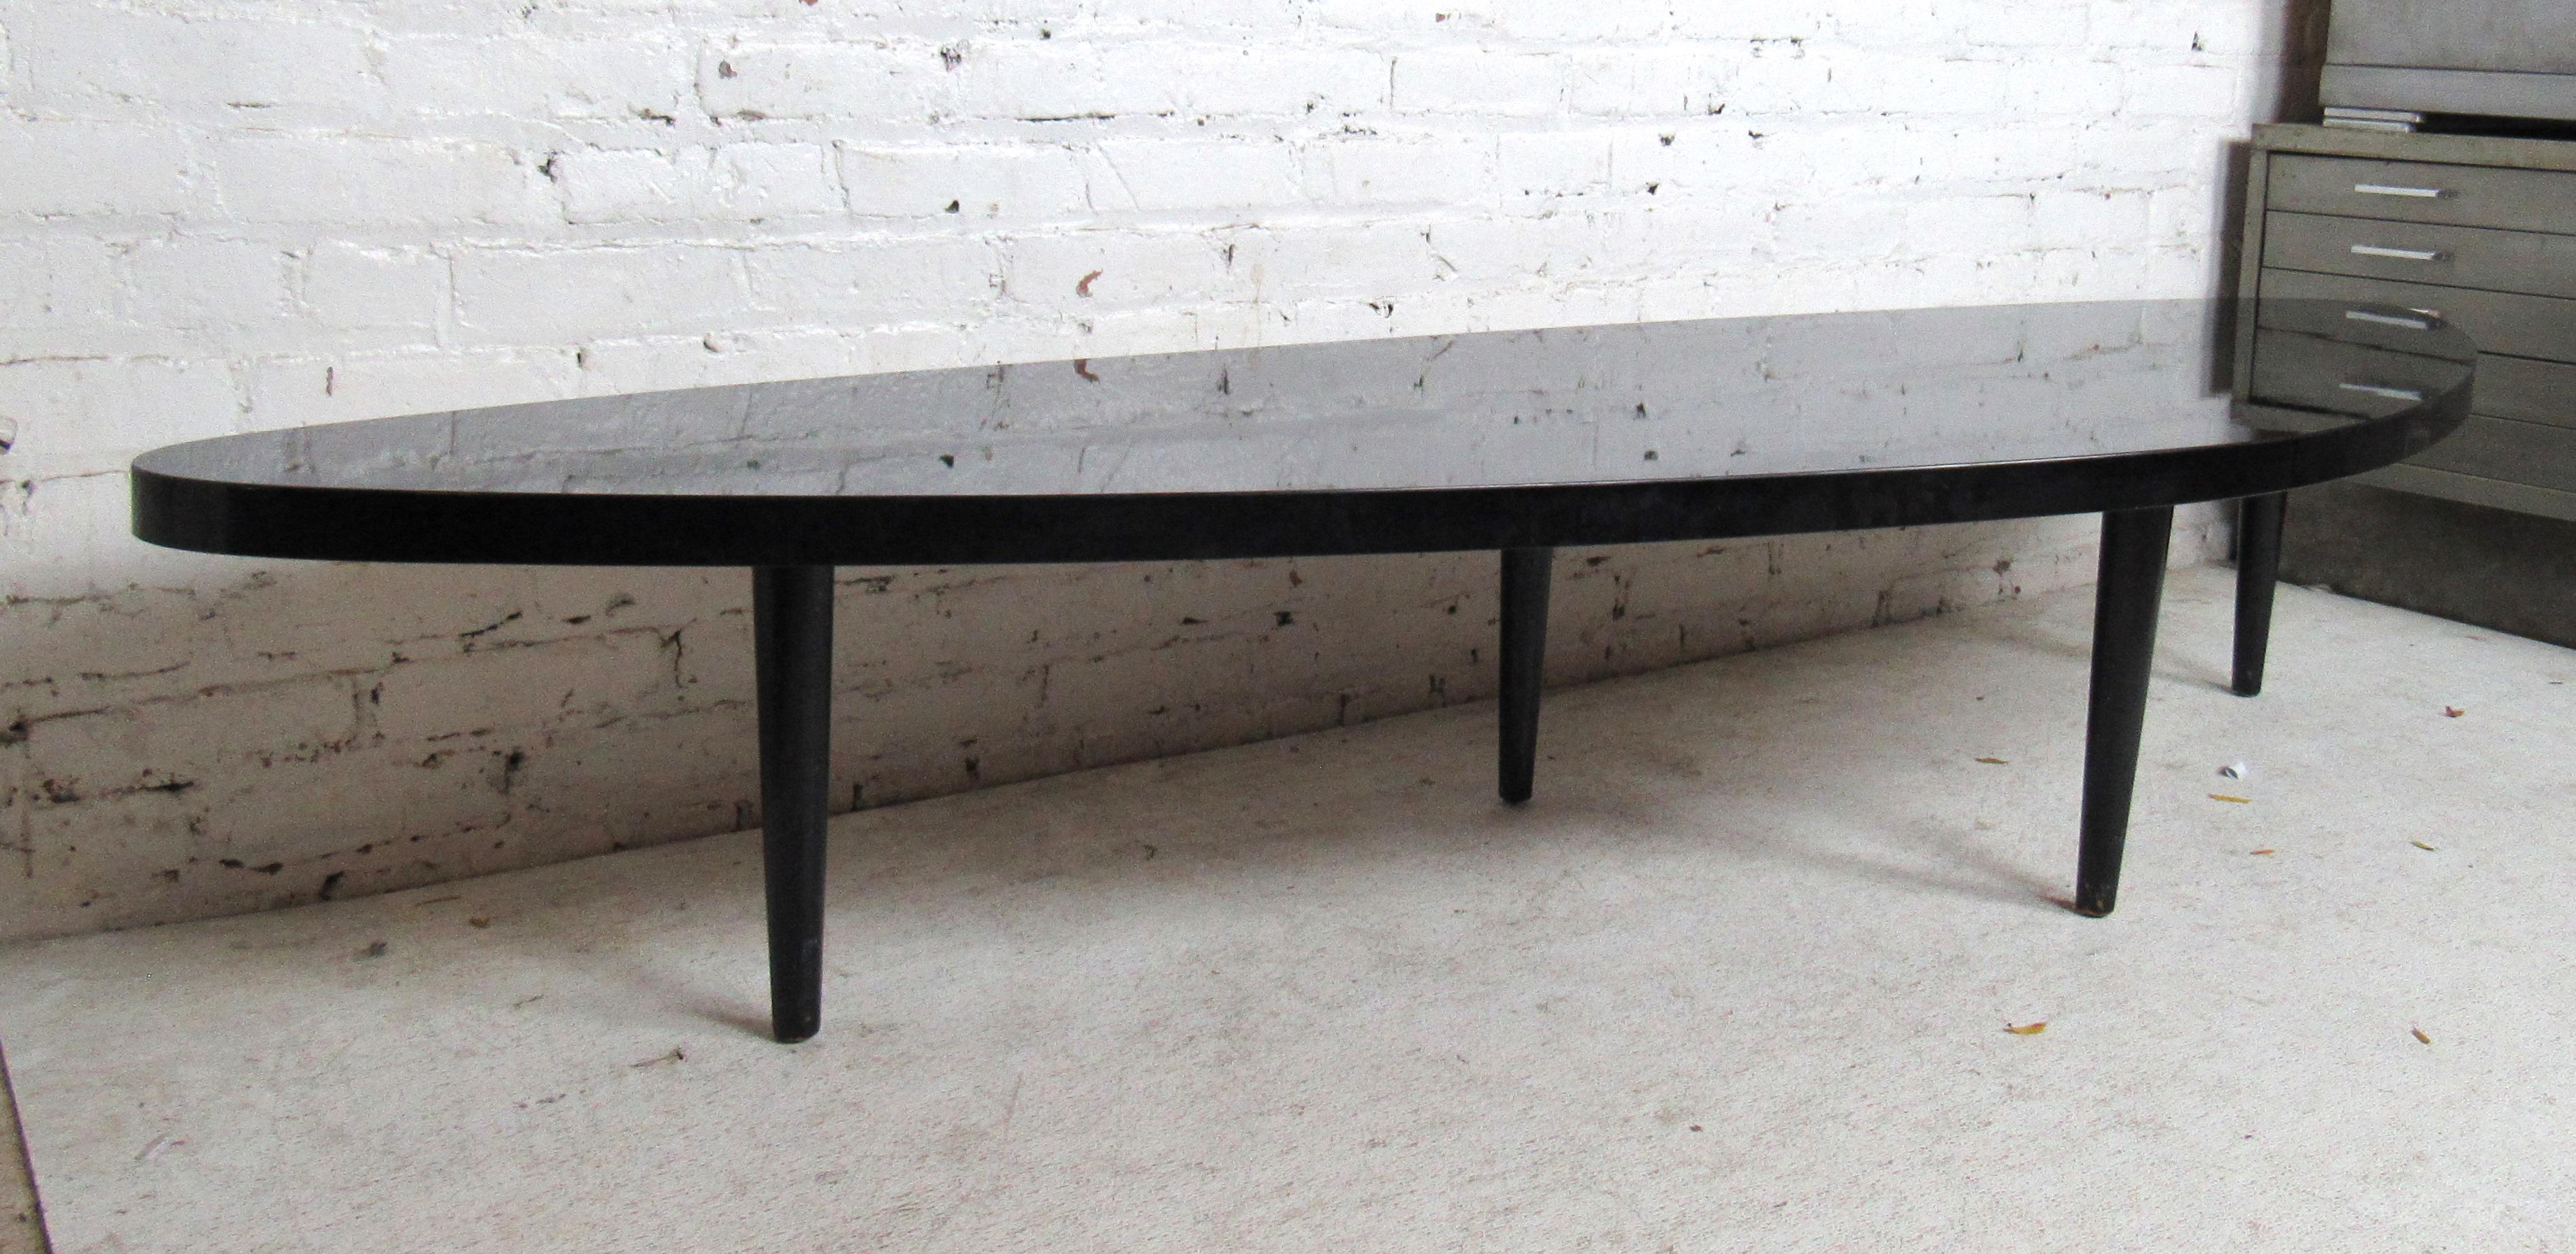 Unique Mid-Century Modern black laminate coffee table features four tapered legs and an odd shaped top.

Please confirm item location (NY or NJ).